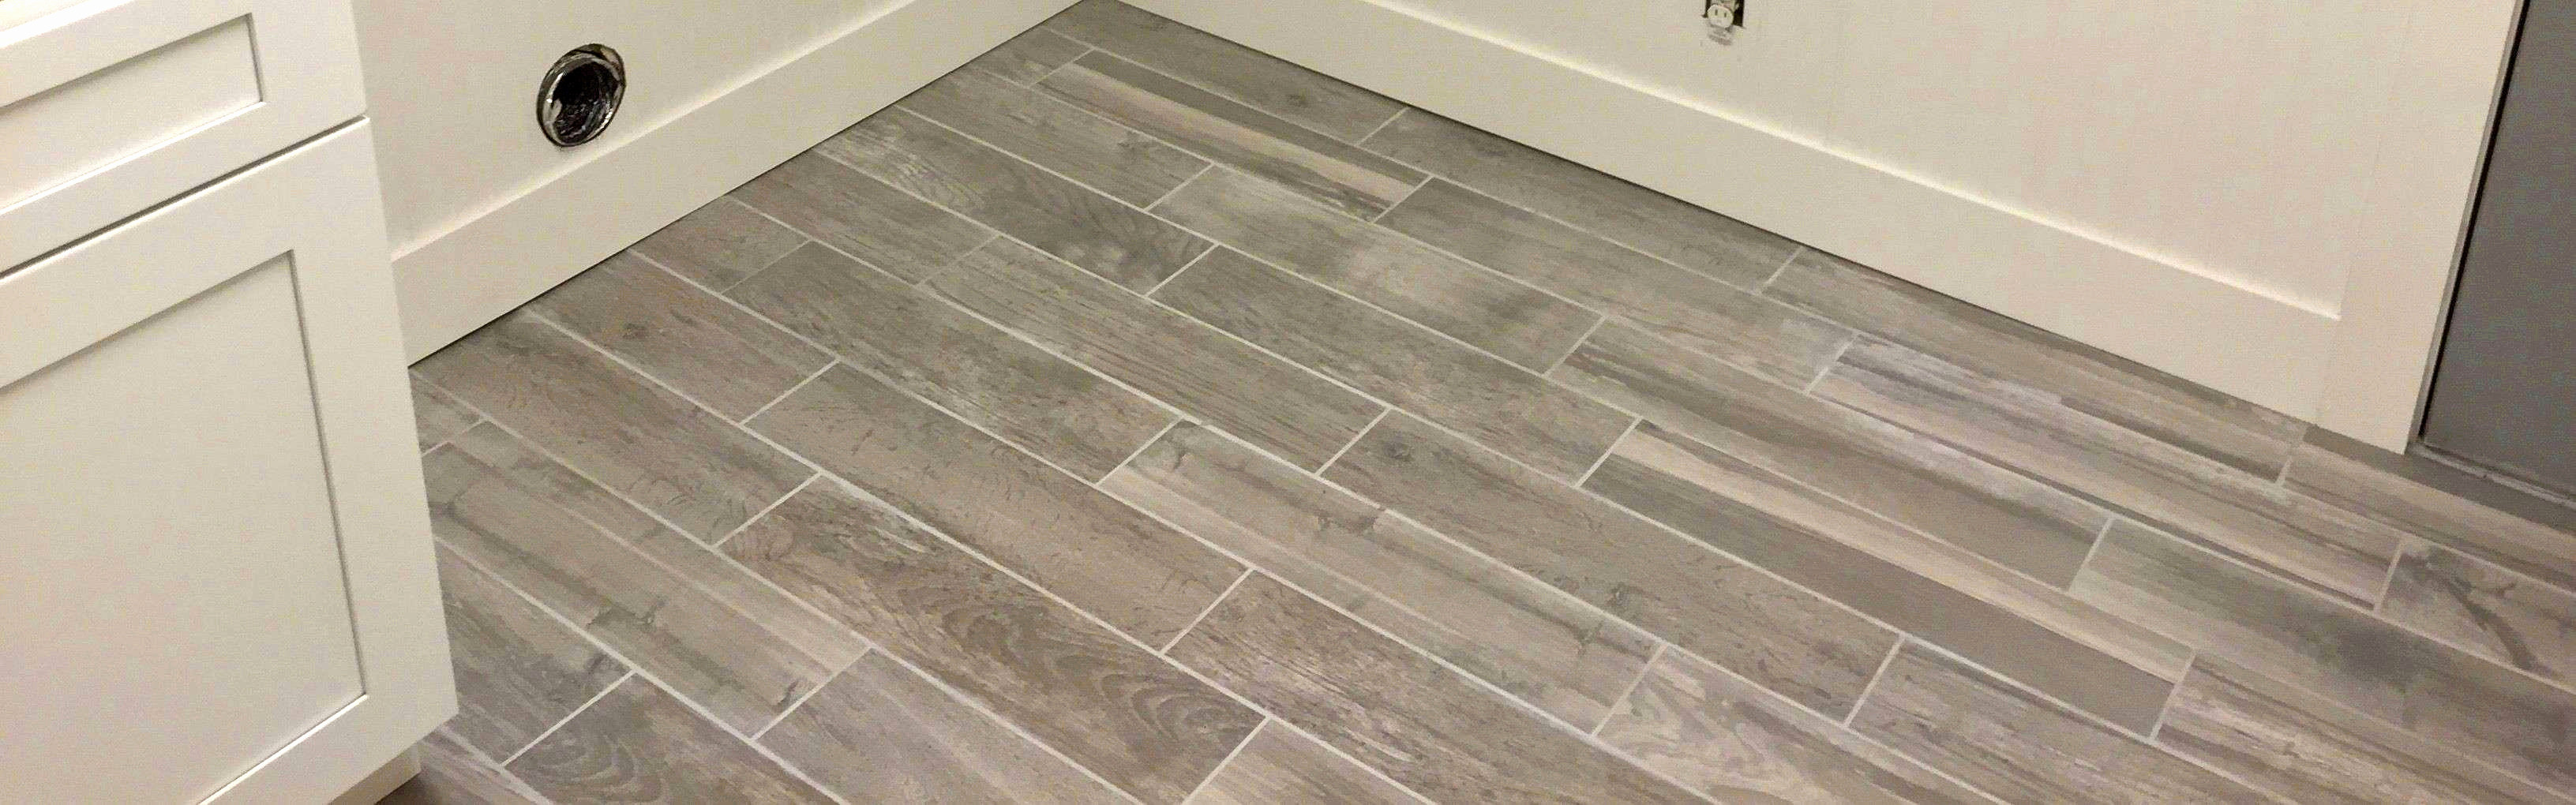 28 Nice Hardwood Floor In Basement 2024 free download hardwood floor in basement of residential flooring installation 50 lovely how to get paint f inside unique bathroom tiling ideas best h sink install bathroom i 0d exciting beautiful fresh ba